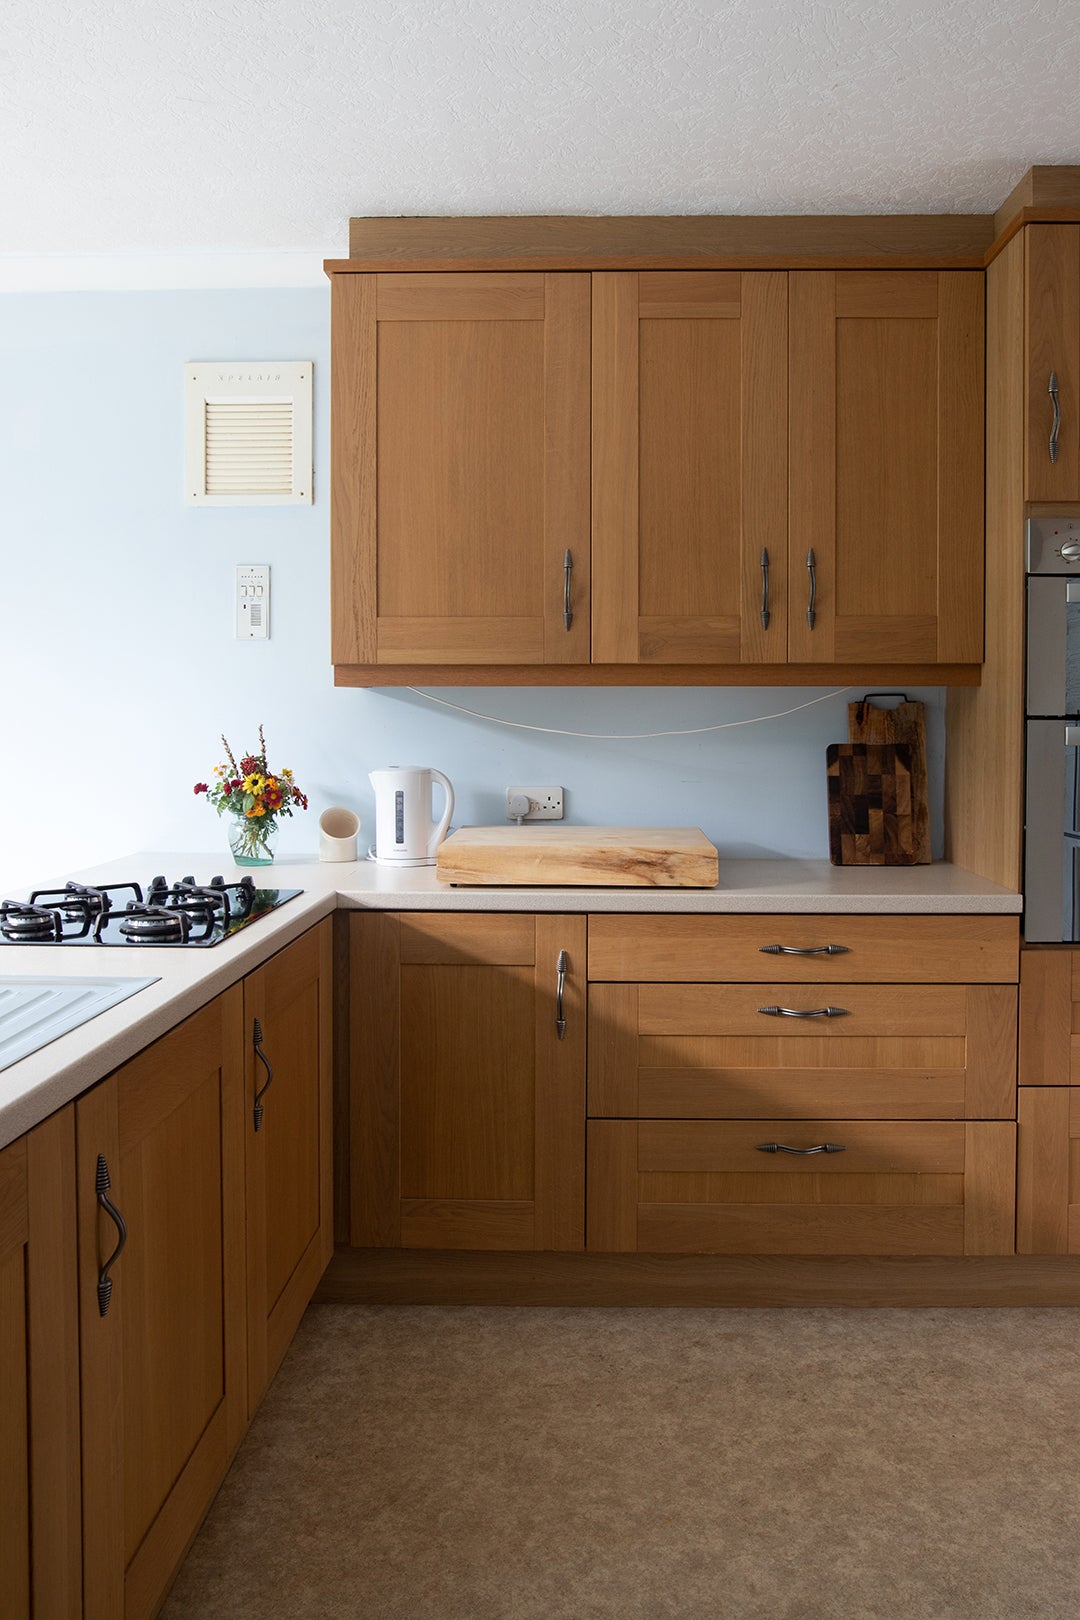 How This Londoner’s Weekend Kitchen Refresh Turned Into a 4-Month Renovation